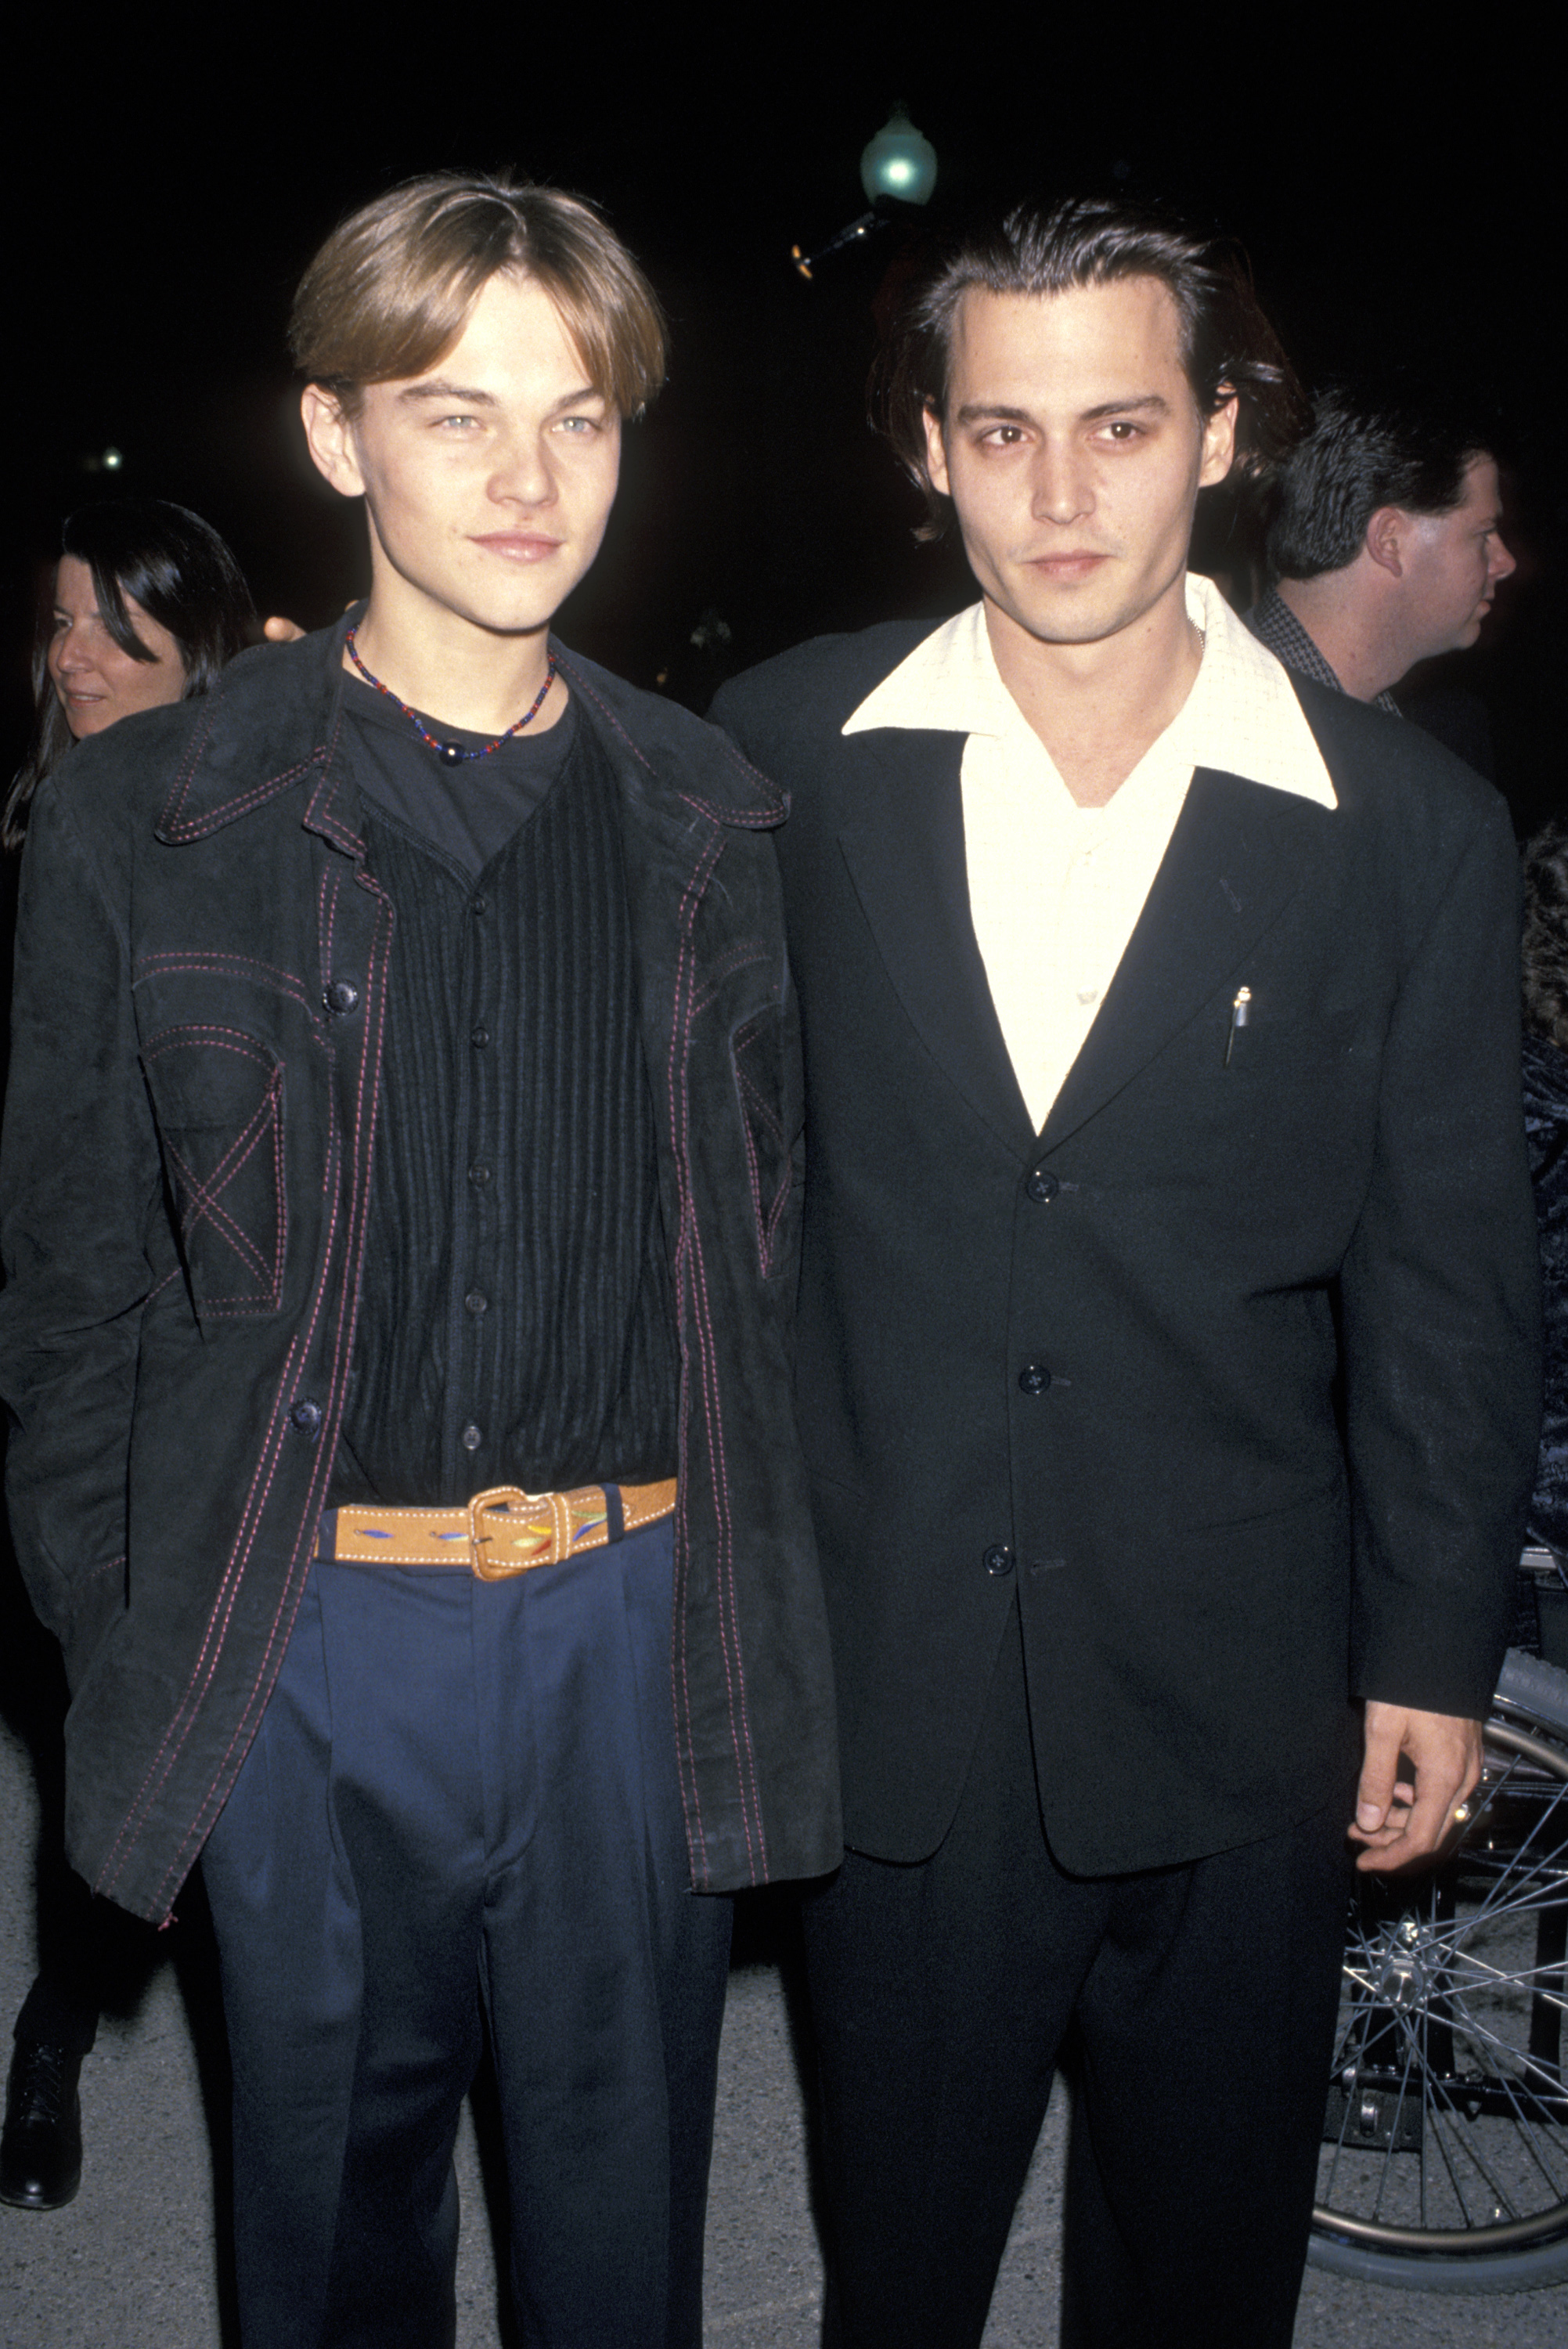 From left: Leonardo DiCaprio and Johnny Depp attend a screening for What's Eating Gilbert Grape in Los Angeles on Dec. 12, 1993.